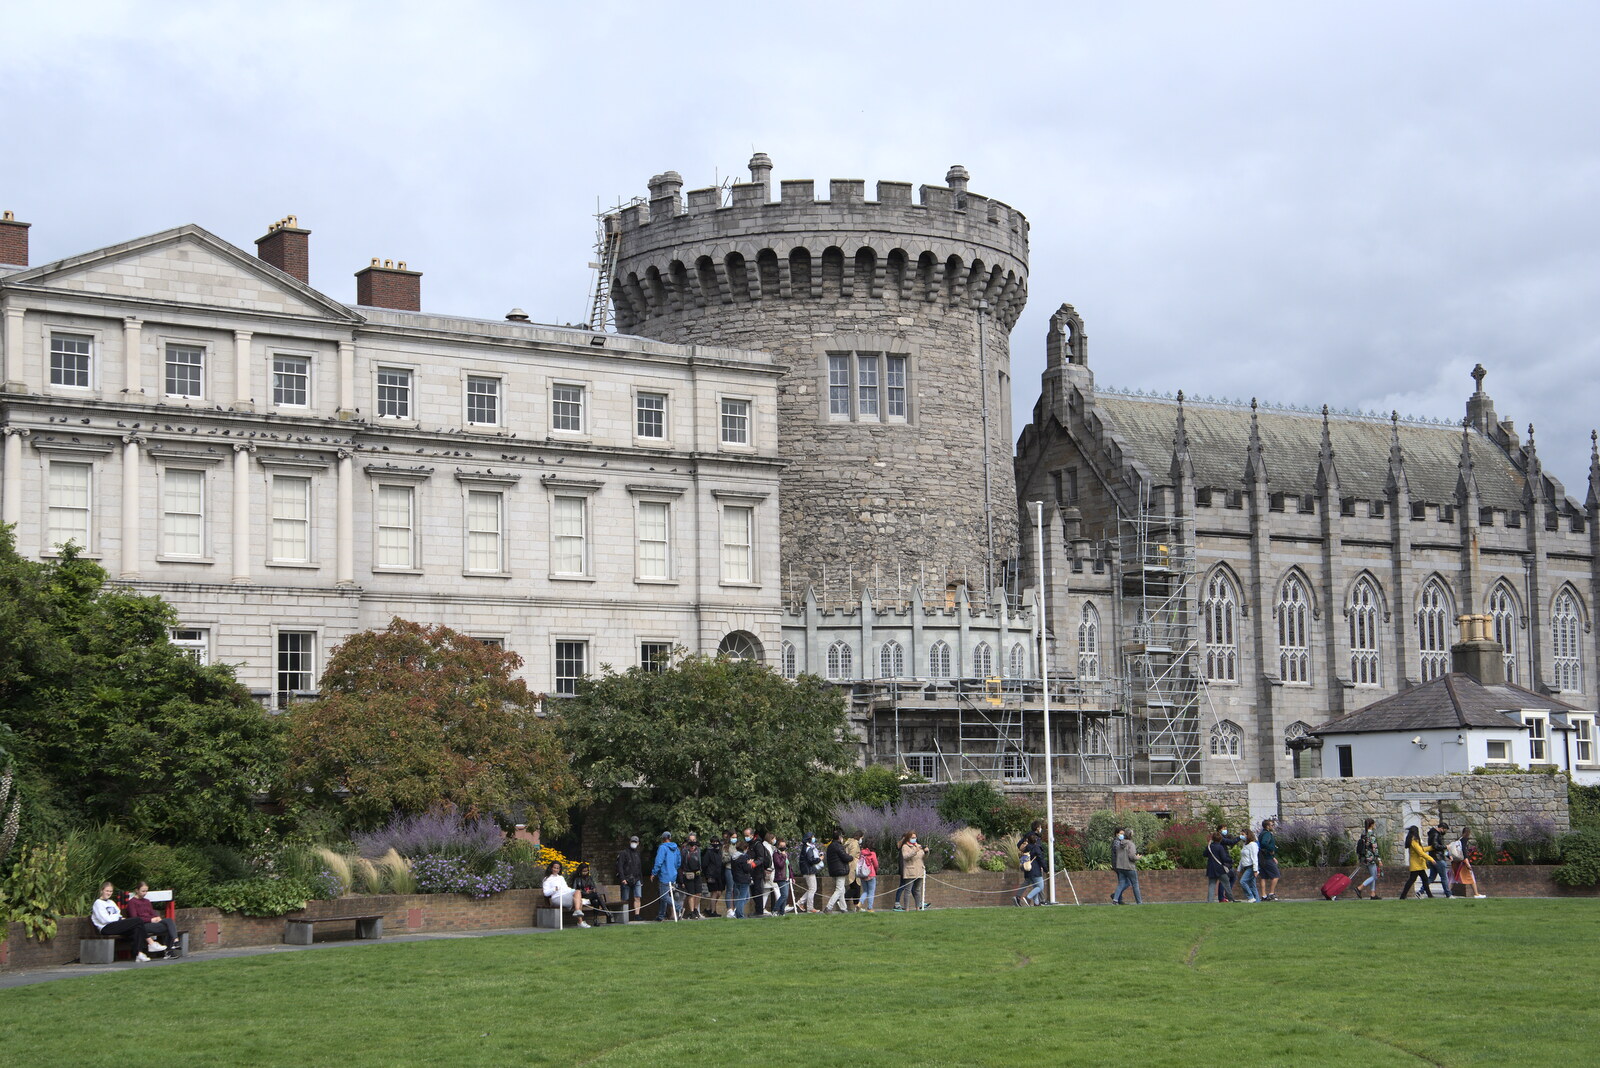 Dublin Castle from A Trip to Noddy's, and Dublin City Centre, Wicklow and Dublin, Ireland - 16th August 2021